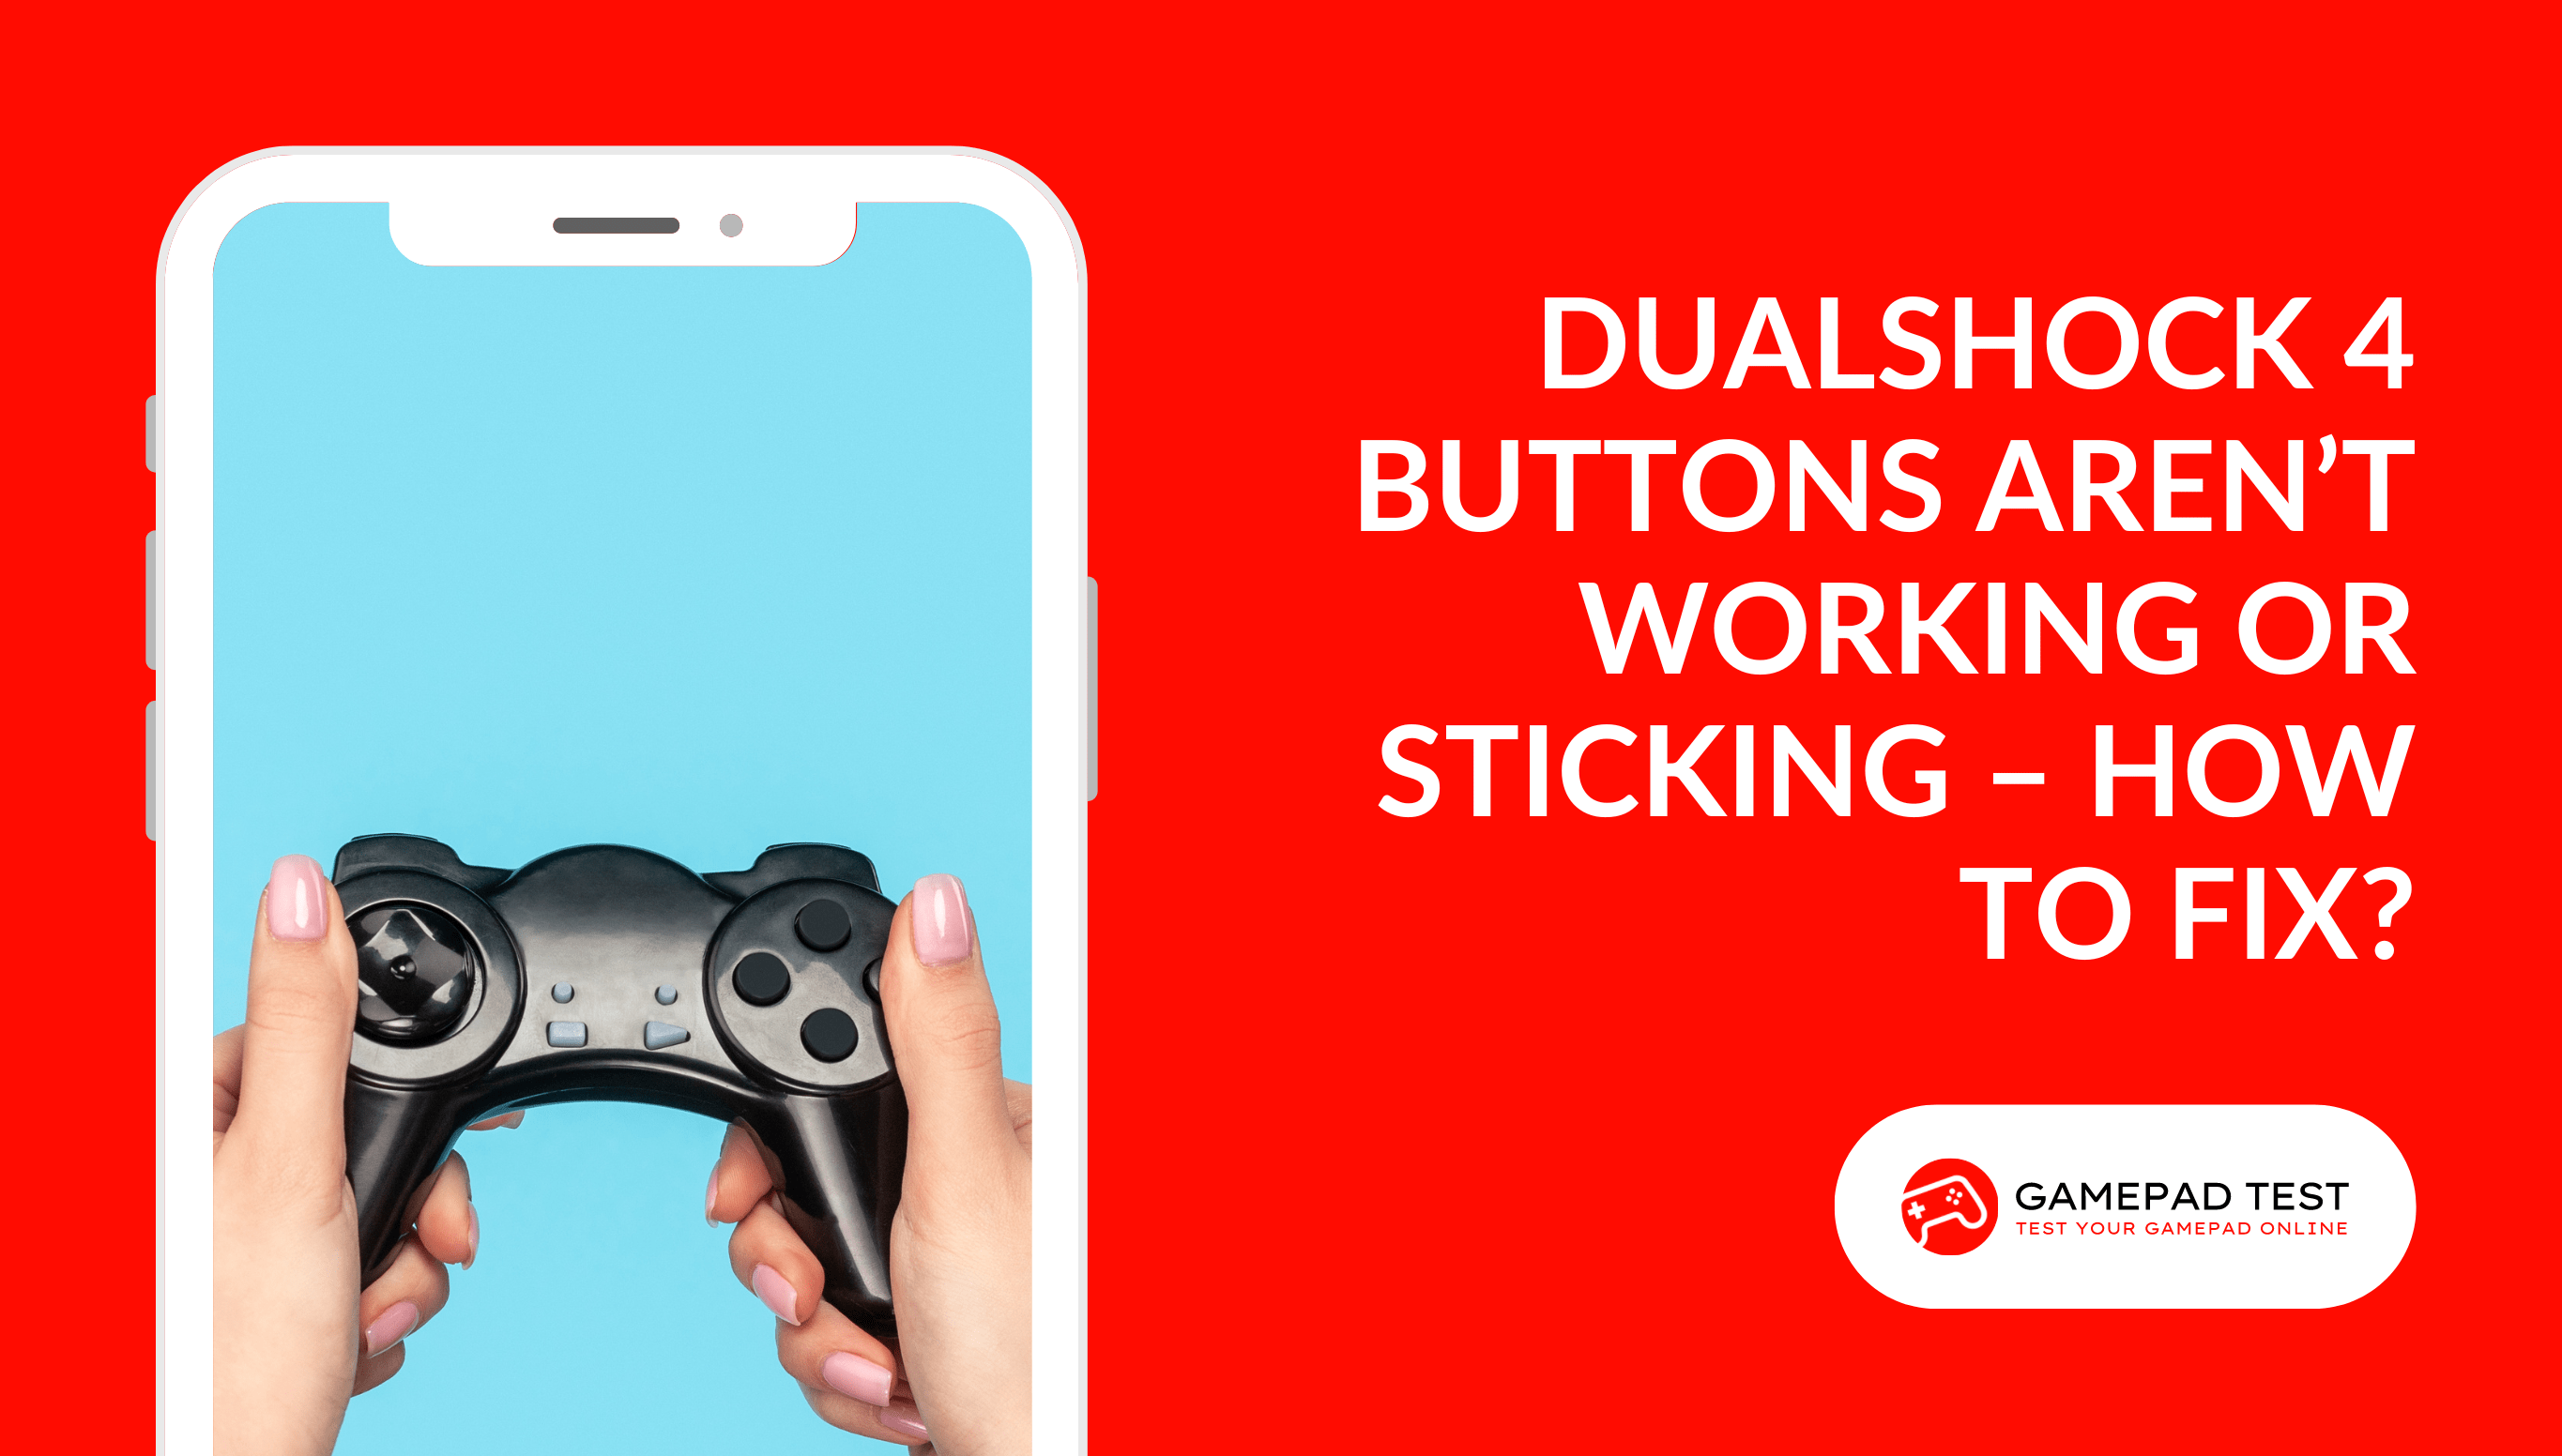 DualShock 4 Buttons Aren’t Working Or Sticking – How to Fix - Blog Featured Image - gamepadtest.com